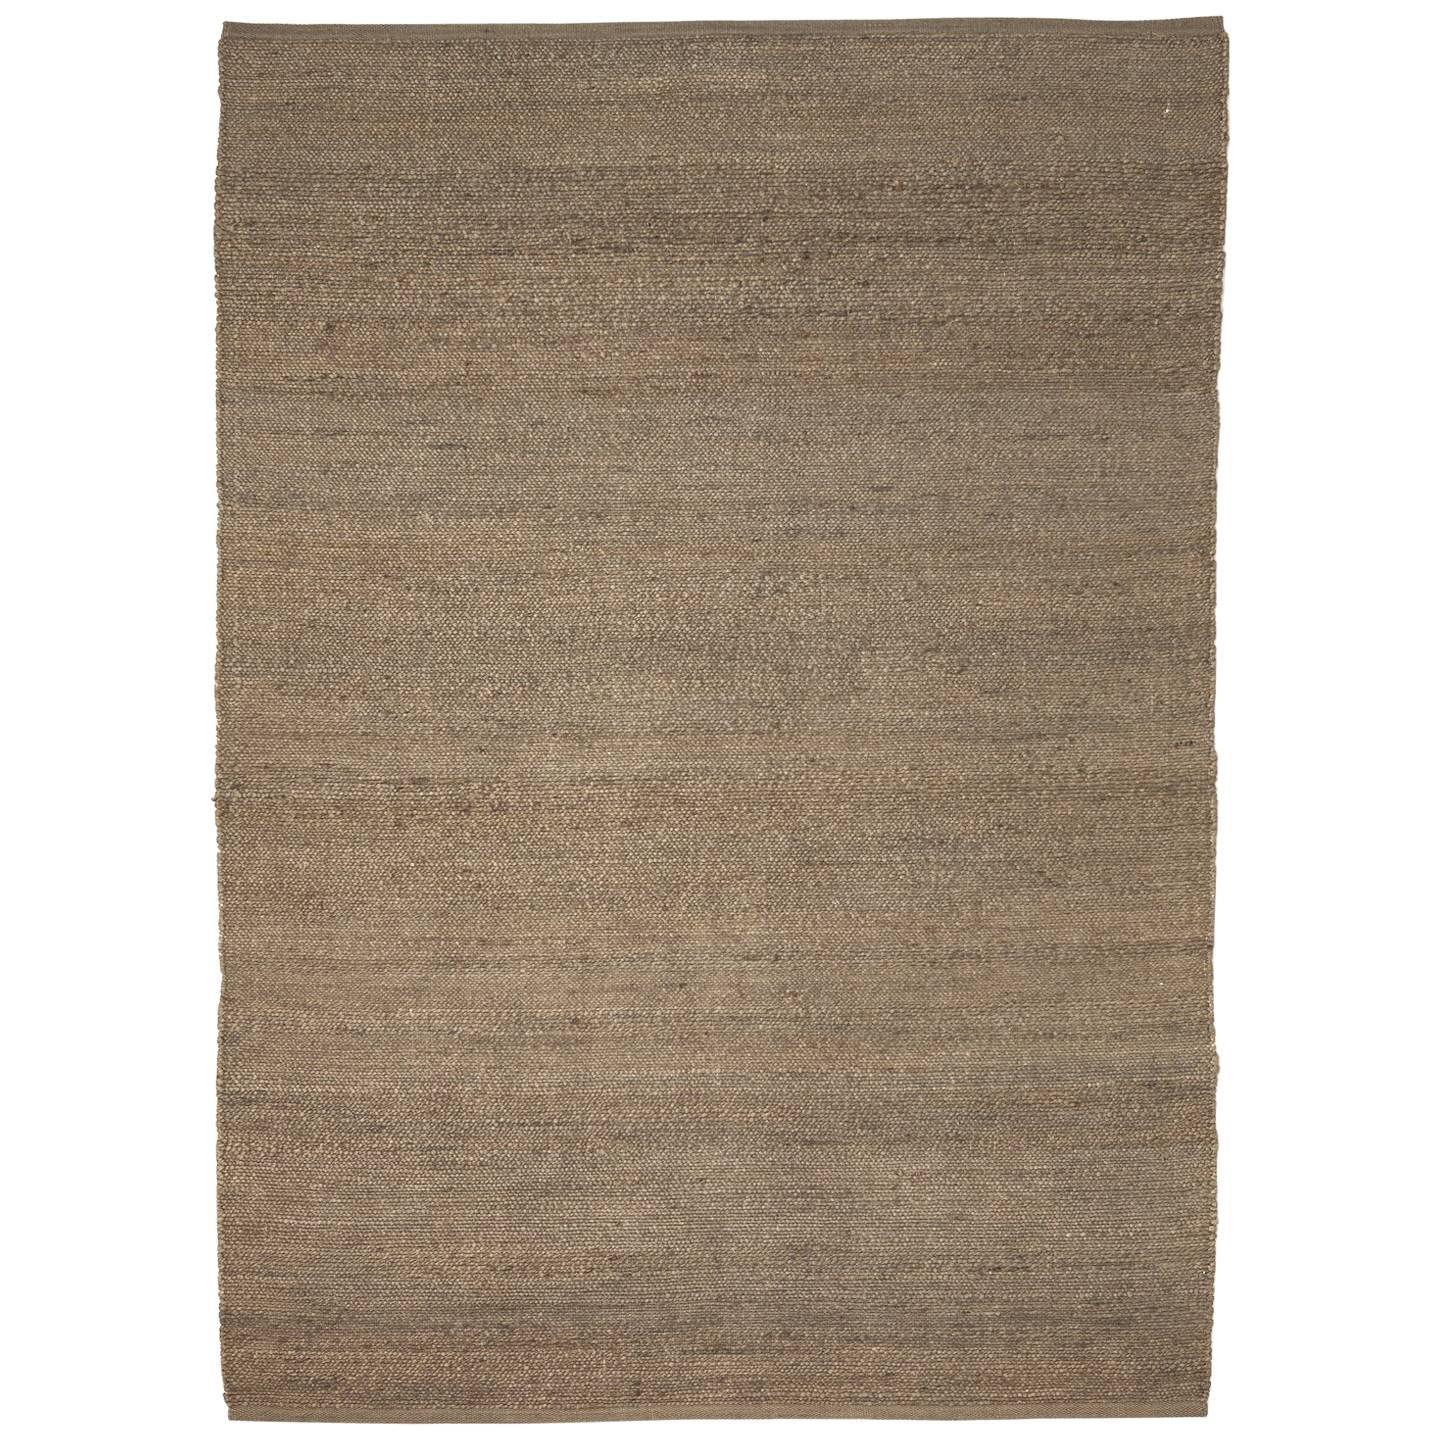 Hand-Loomed Herb Rug by Nani Marquina in Brown, Small